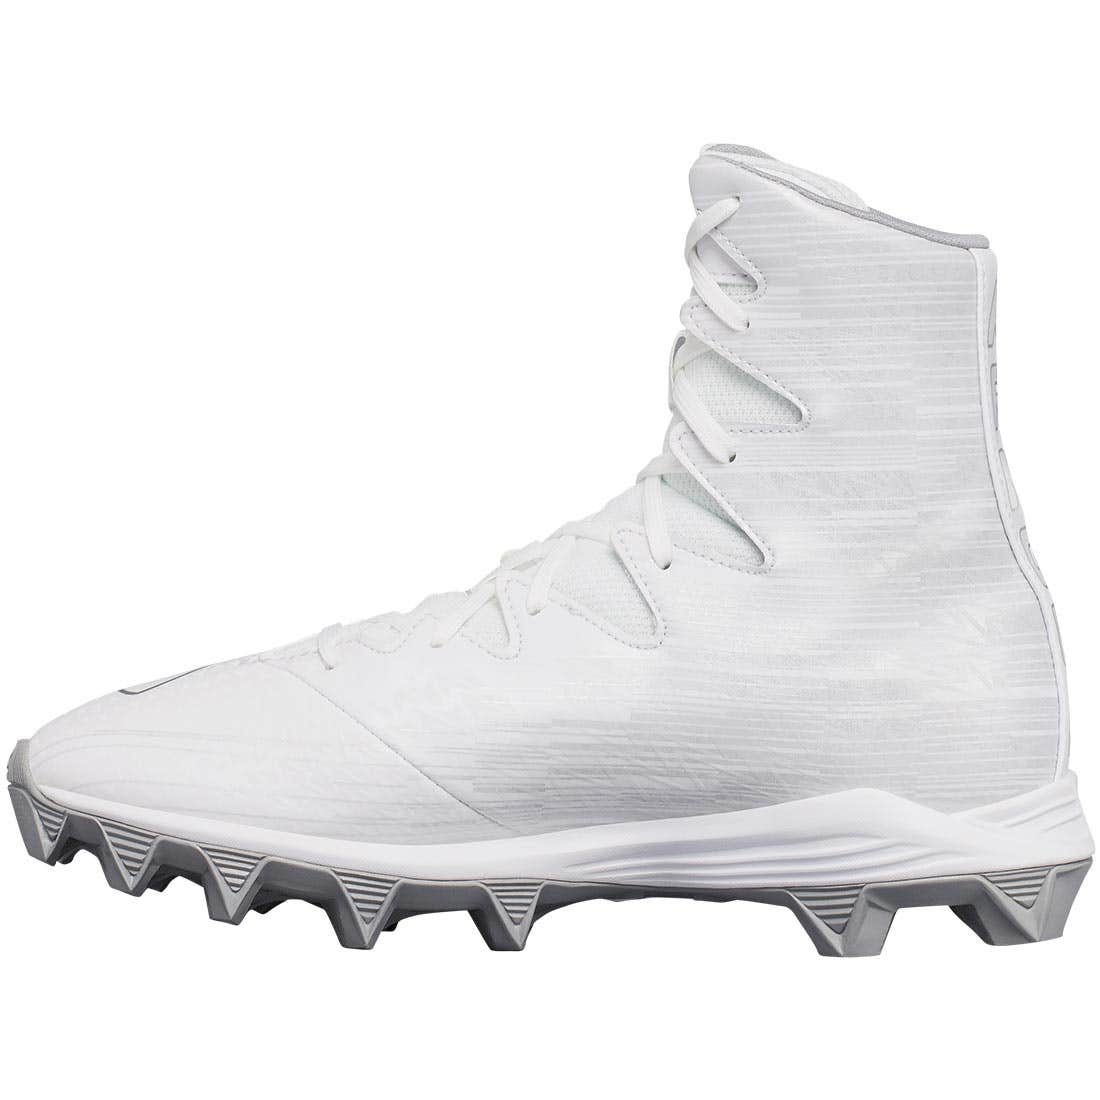 Under Armour Highlight RM Youth Lacrosse Cleat - White/Metallica Silver |  Lacrosse Unlimited